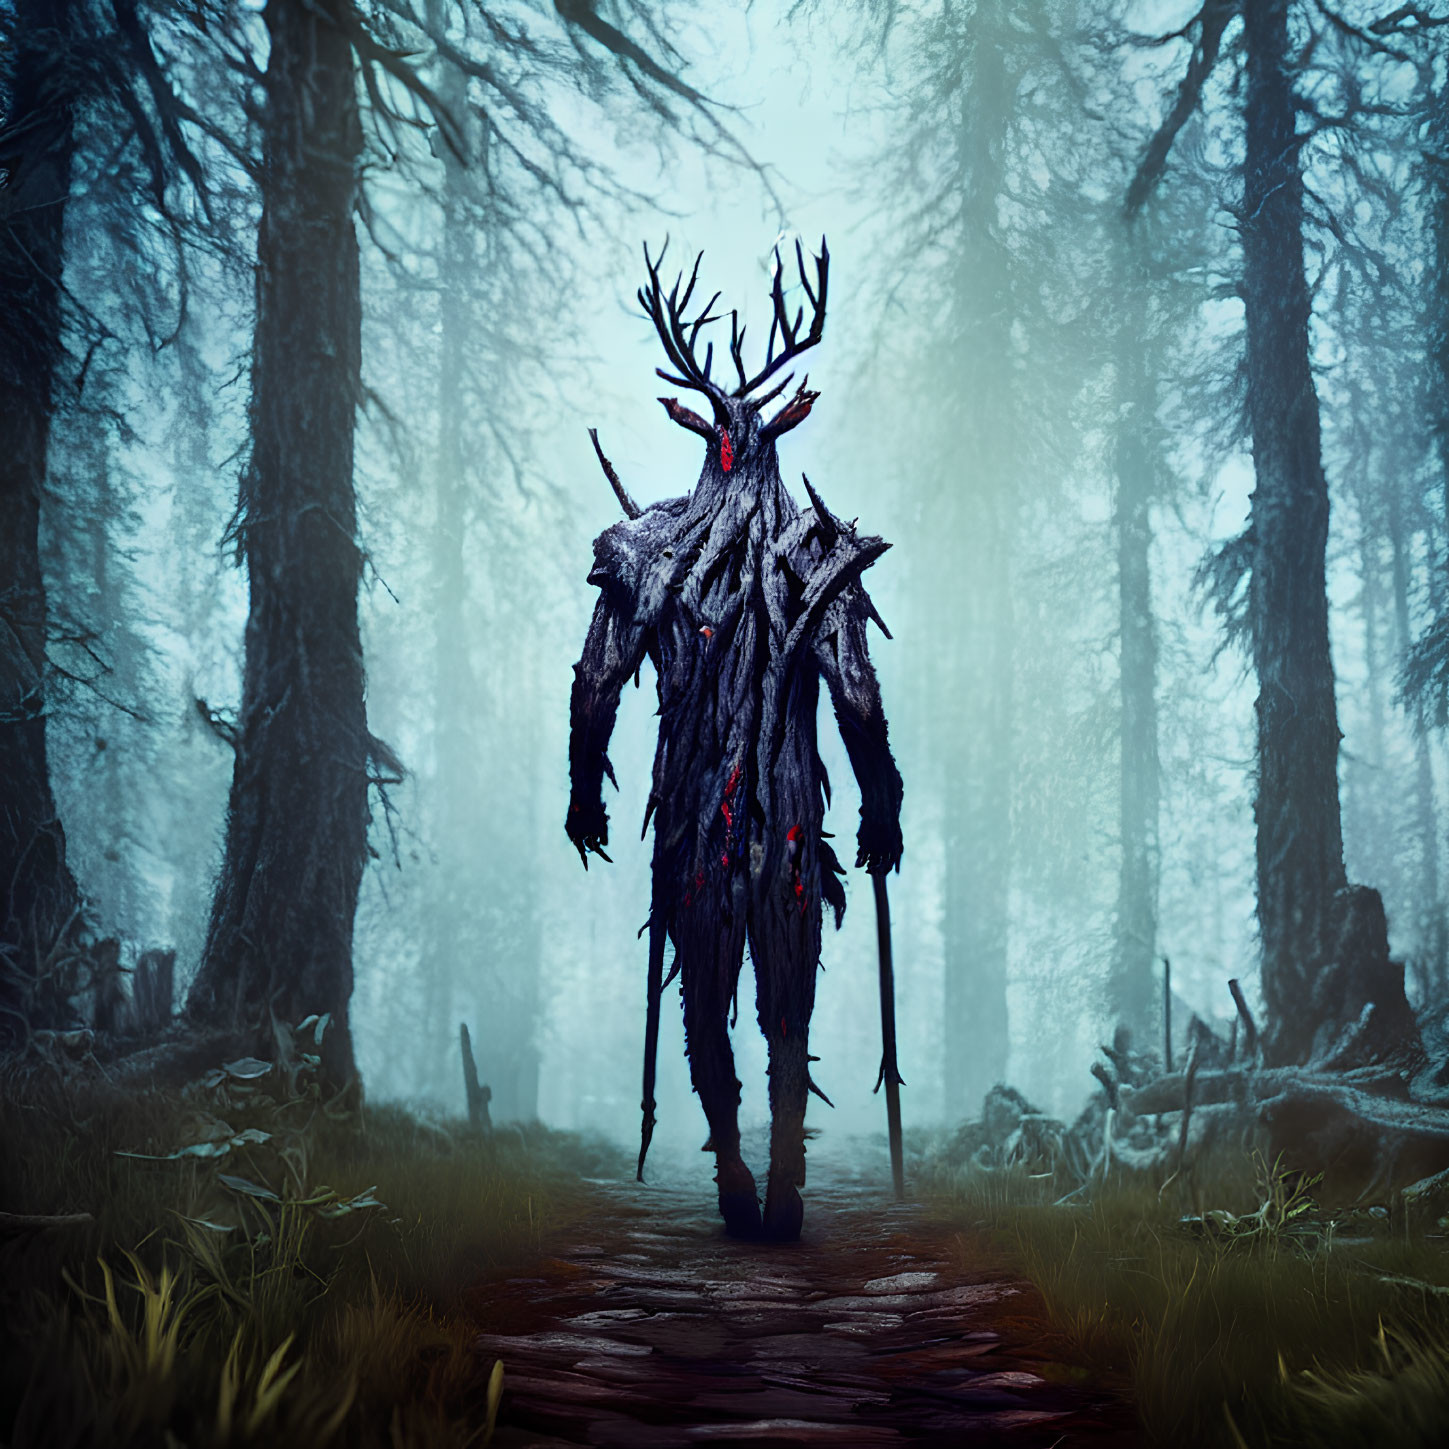 Mystical figure with antlers and twig cloak in foggy forest